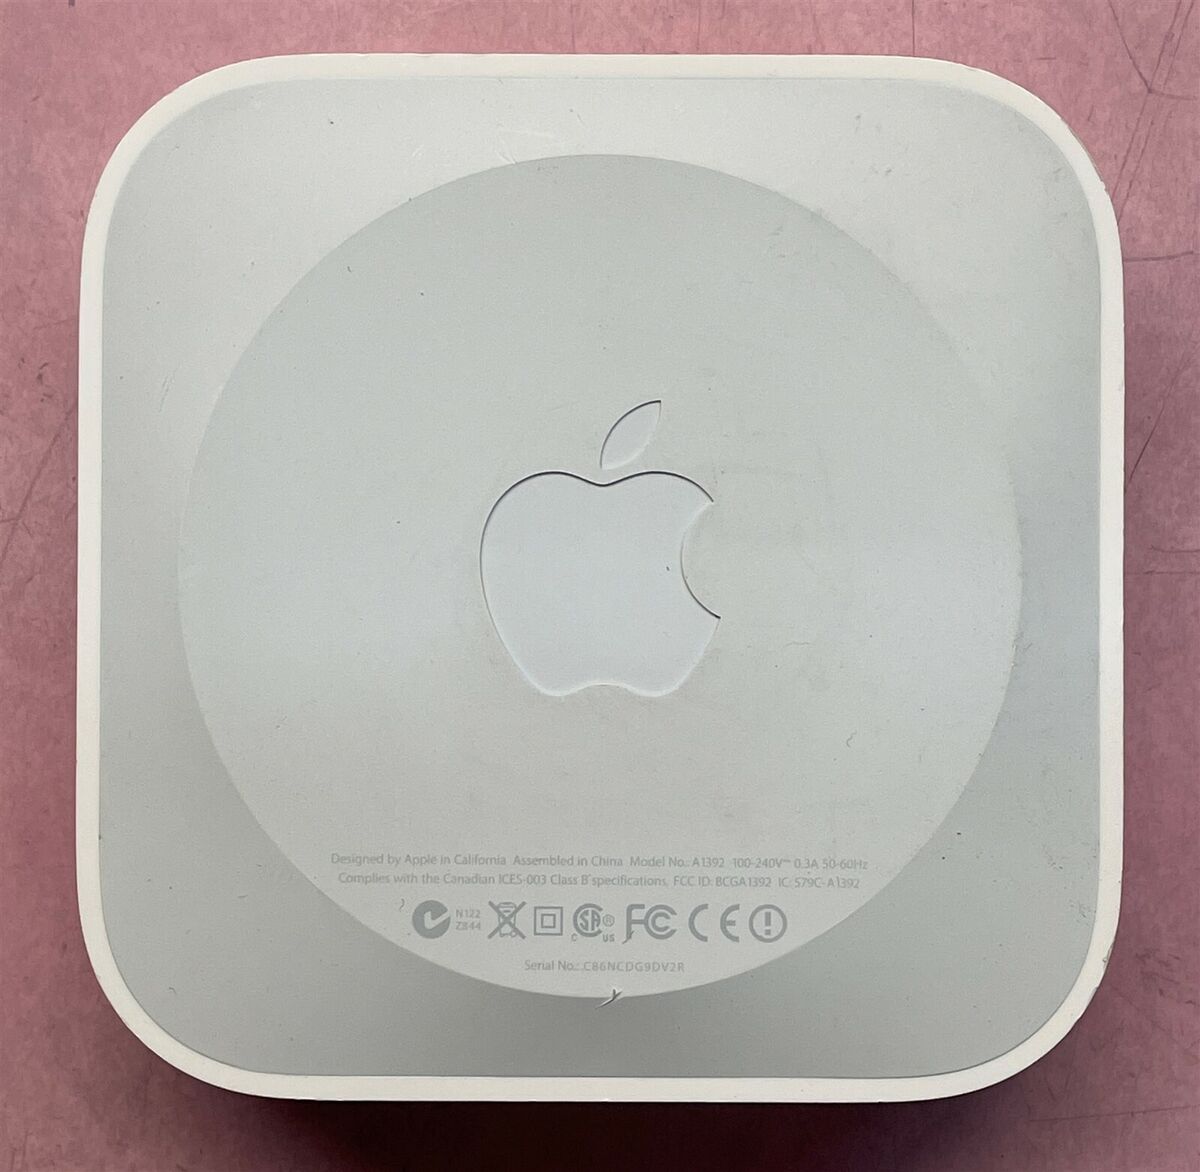 APPLE A1392 2ND AIRPORT EXPRESS BASE STATION WiFi ROUTER | eBay